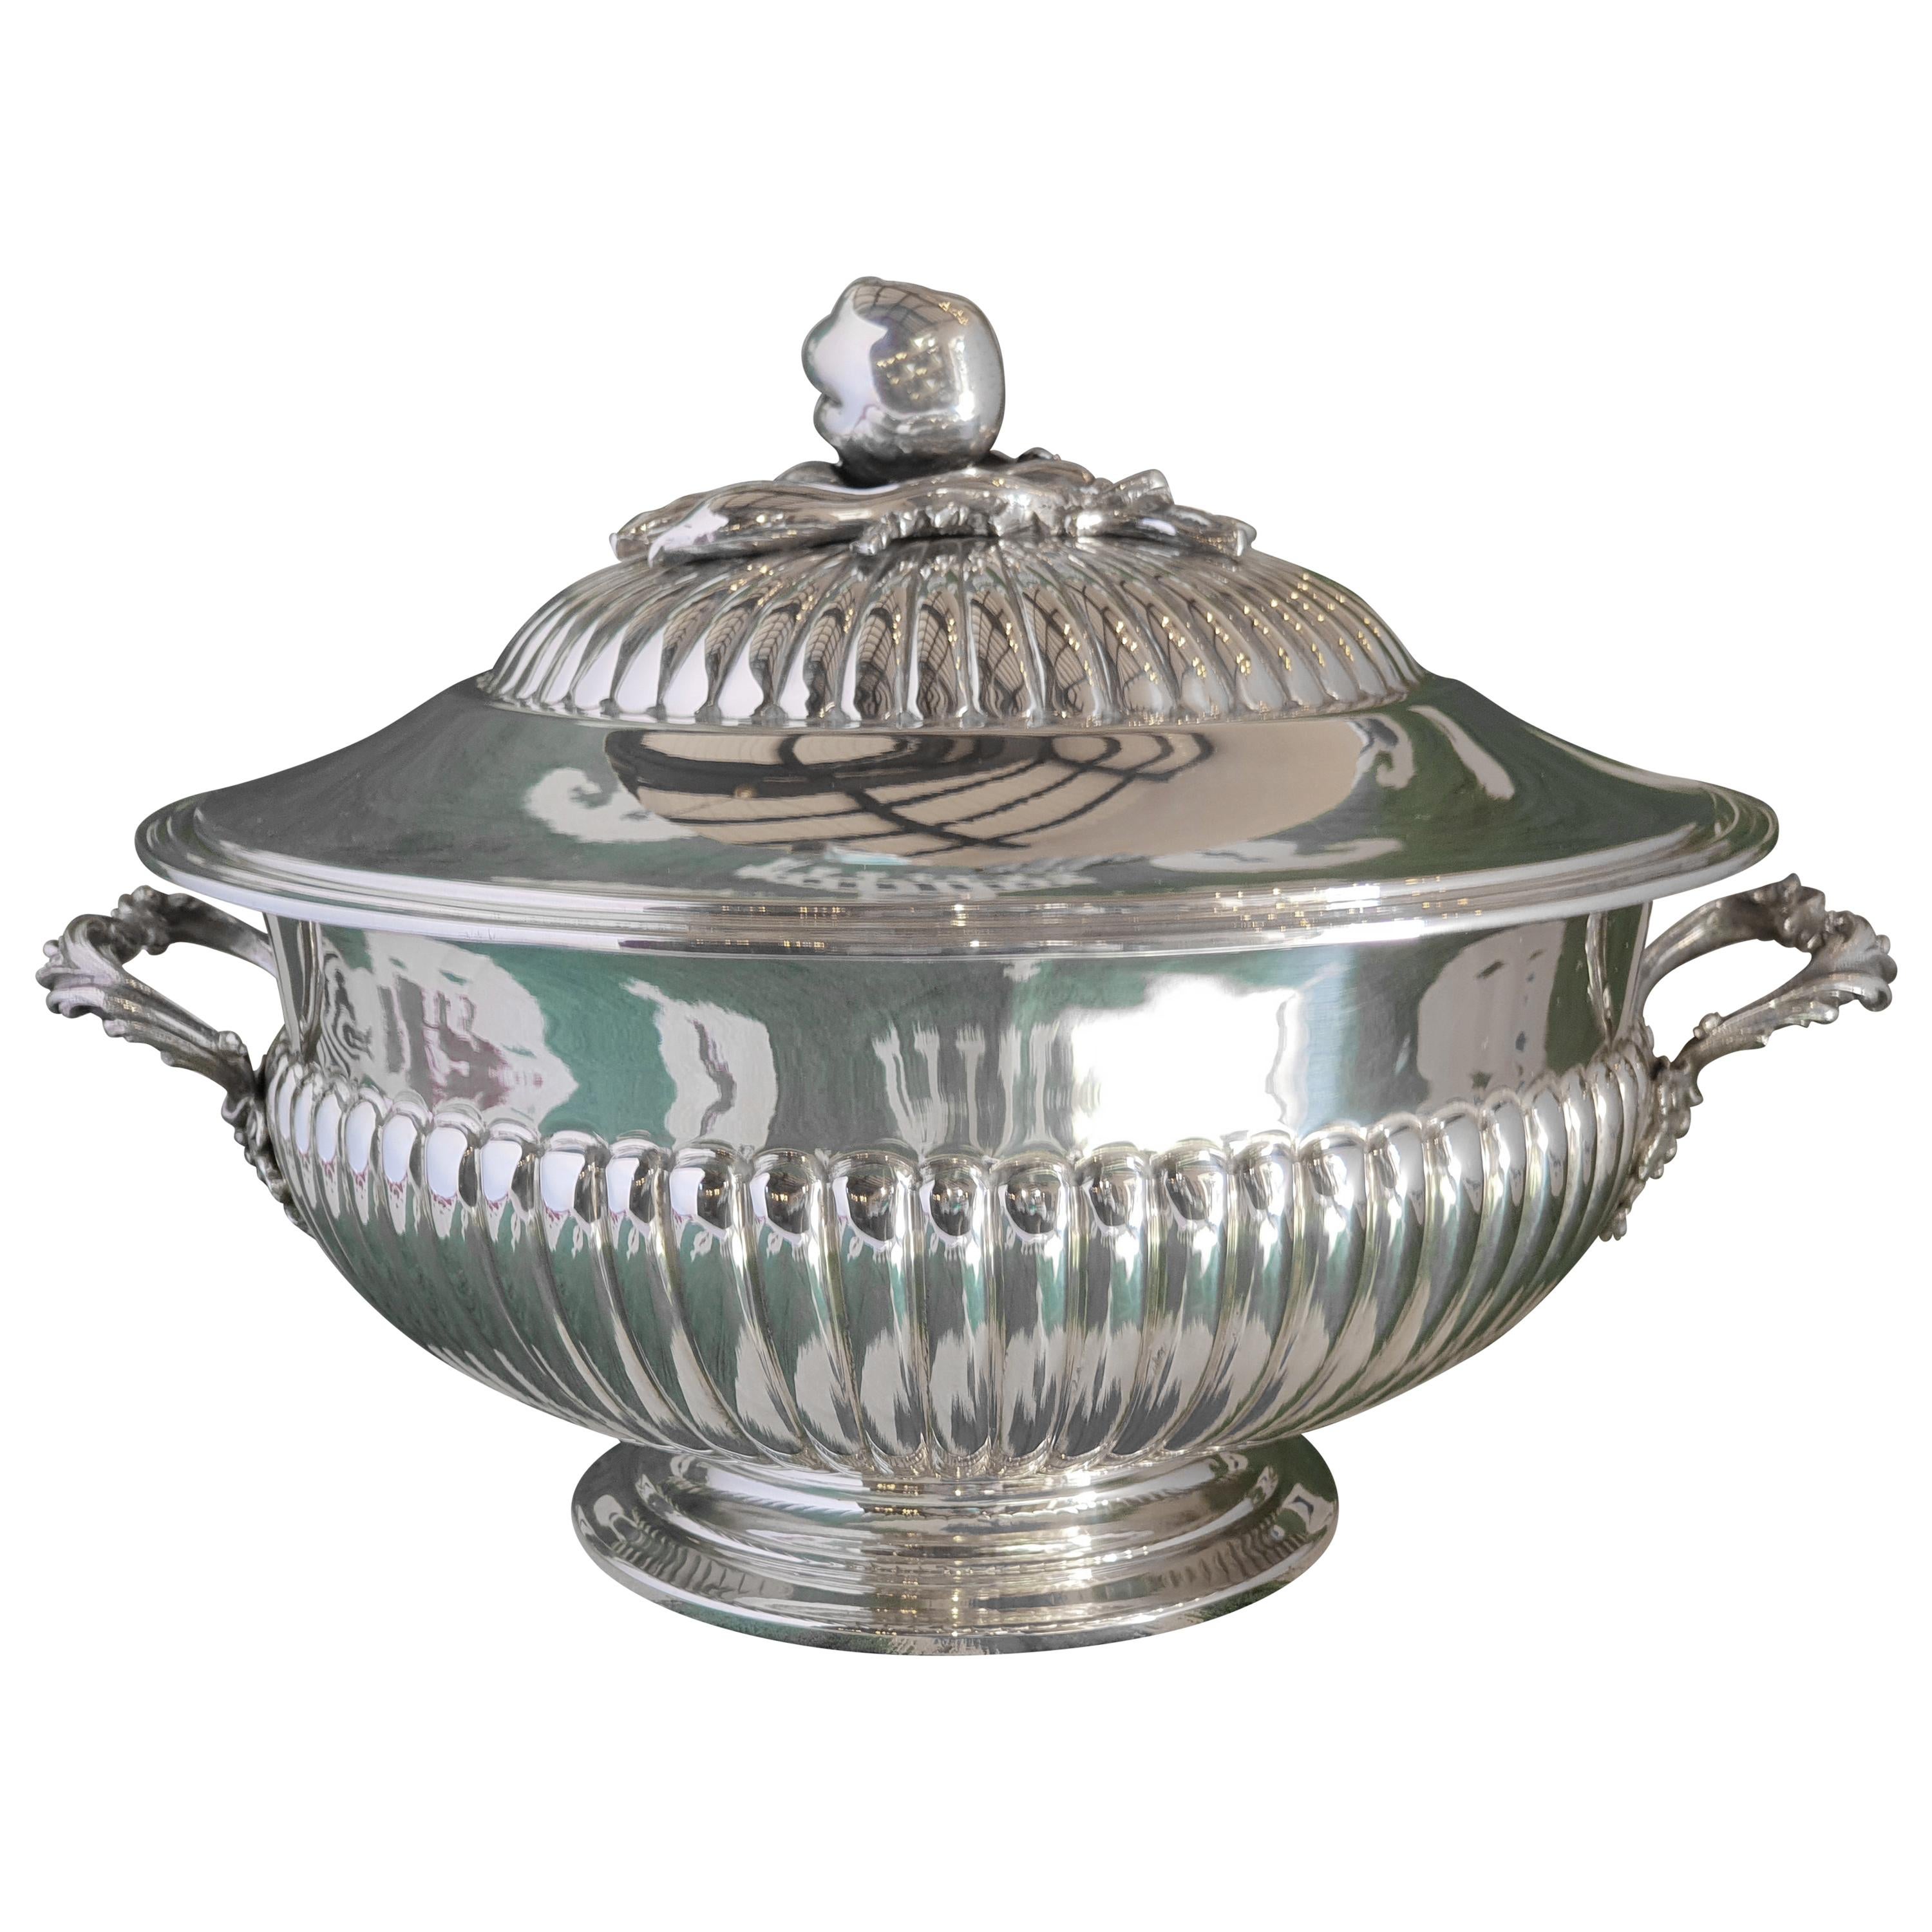 21st Century Sterling Silver Soup Tureen, Italy, 2001